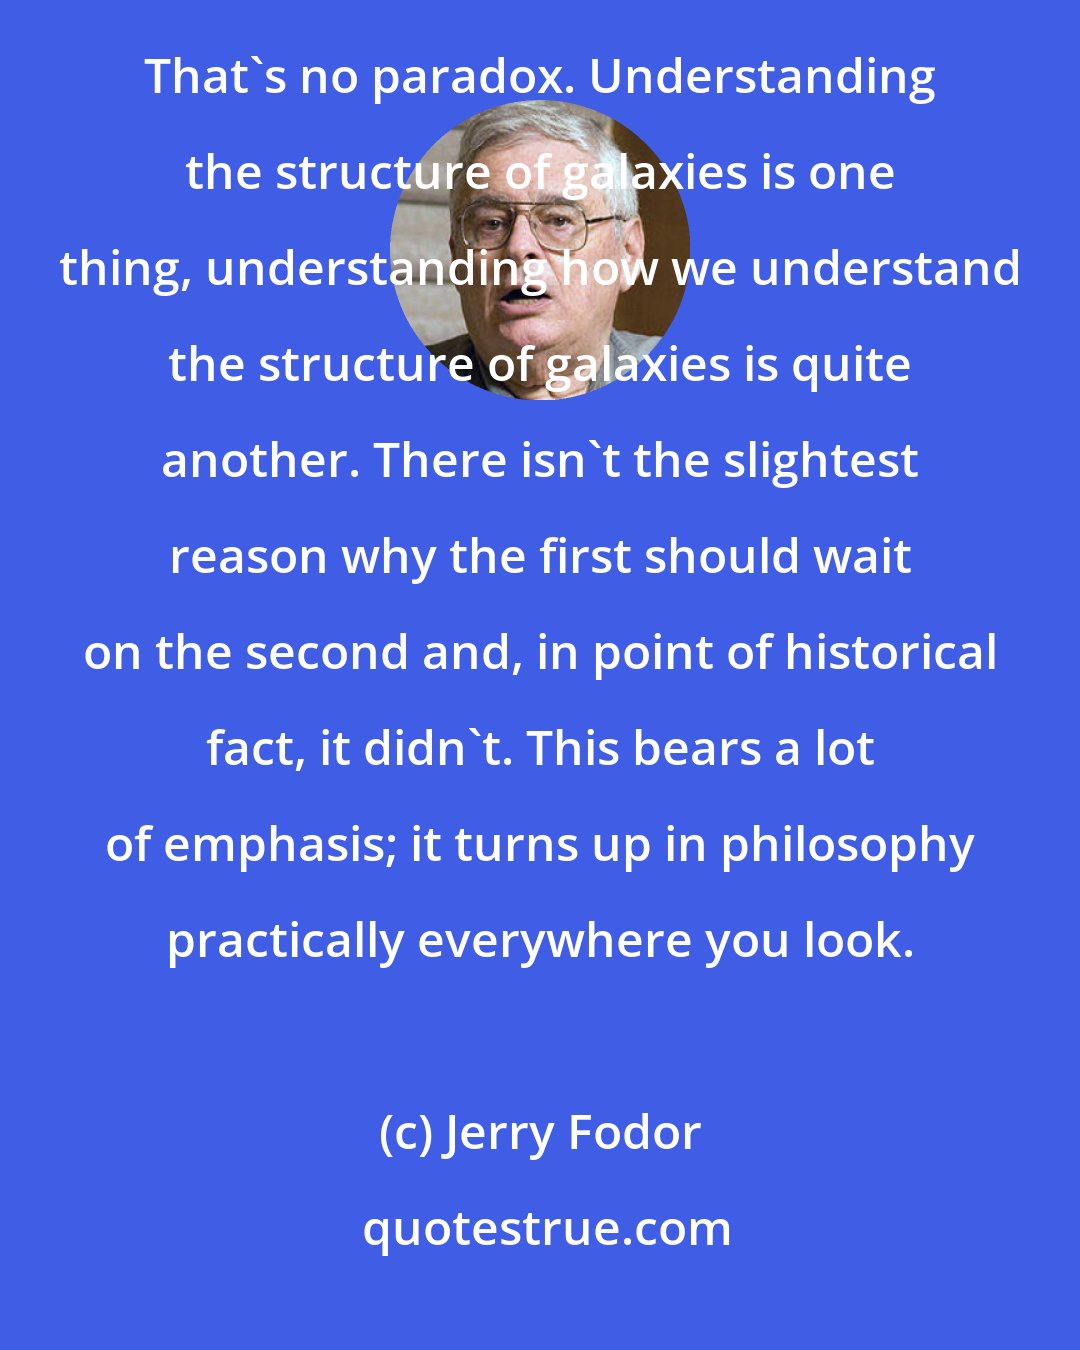 Jerry Fodor: There are lots of cases where we know more about how the world works than we do about how we know how it works. That's no paradox. Understanding the structure of galaxies is one thing, understanding how we understand the structure of galaxies is quite another. There isn't the slightest reason why the first should wait on the second and, in point of historical fact, it didn't. This bears a lot of emphasis; it turns up in philosophy practically everywhere you look.